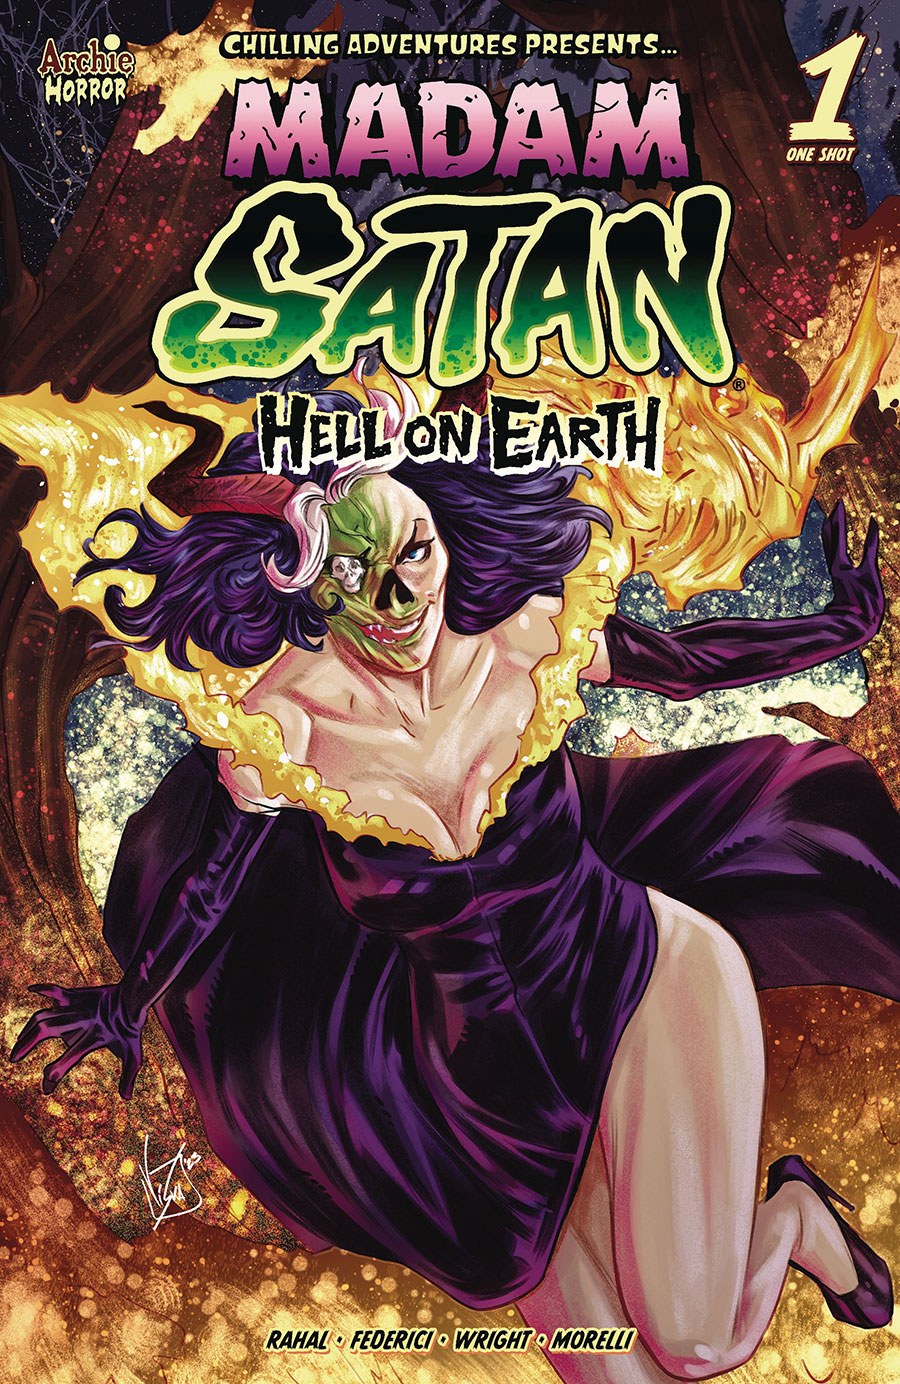 Chilling Adventures Presents Madam Satan Hell On Earth #1 (One Shot) Cover A Regular Vincenzo Federici Cover